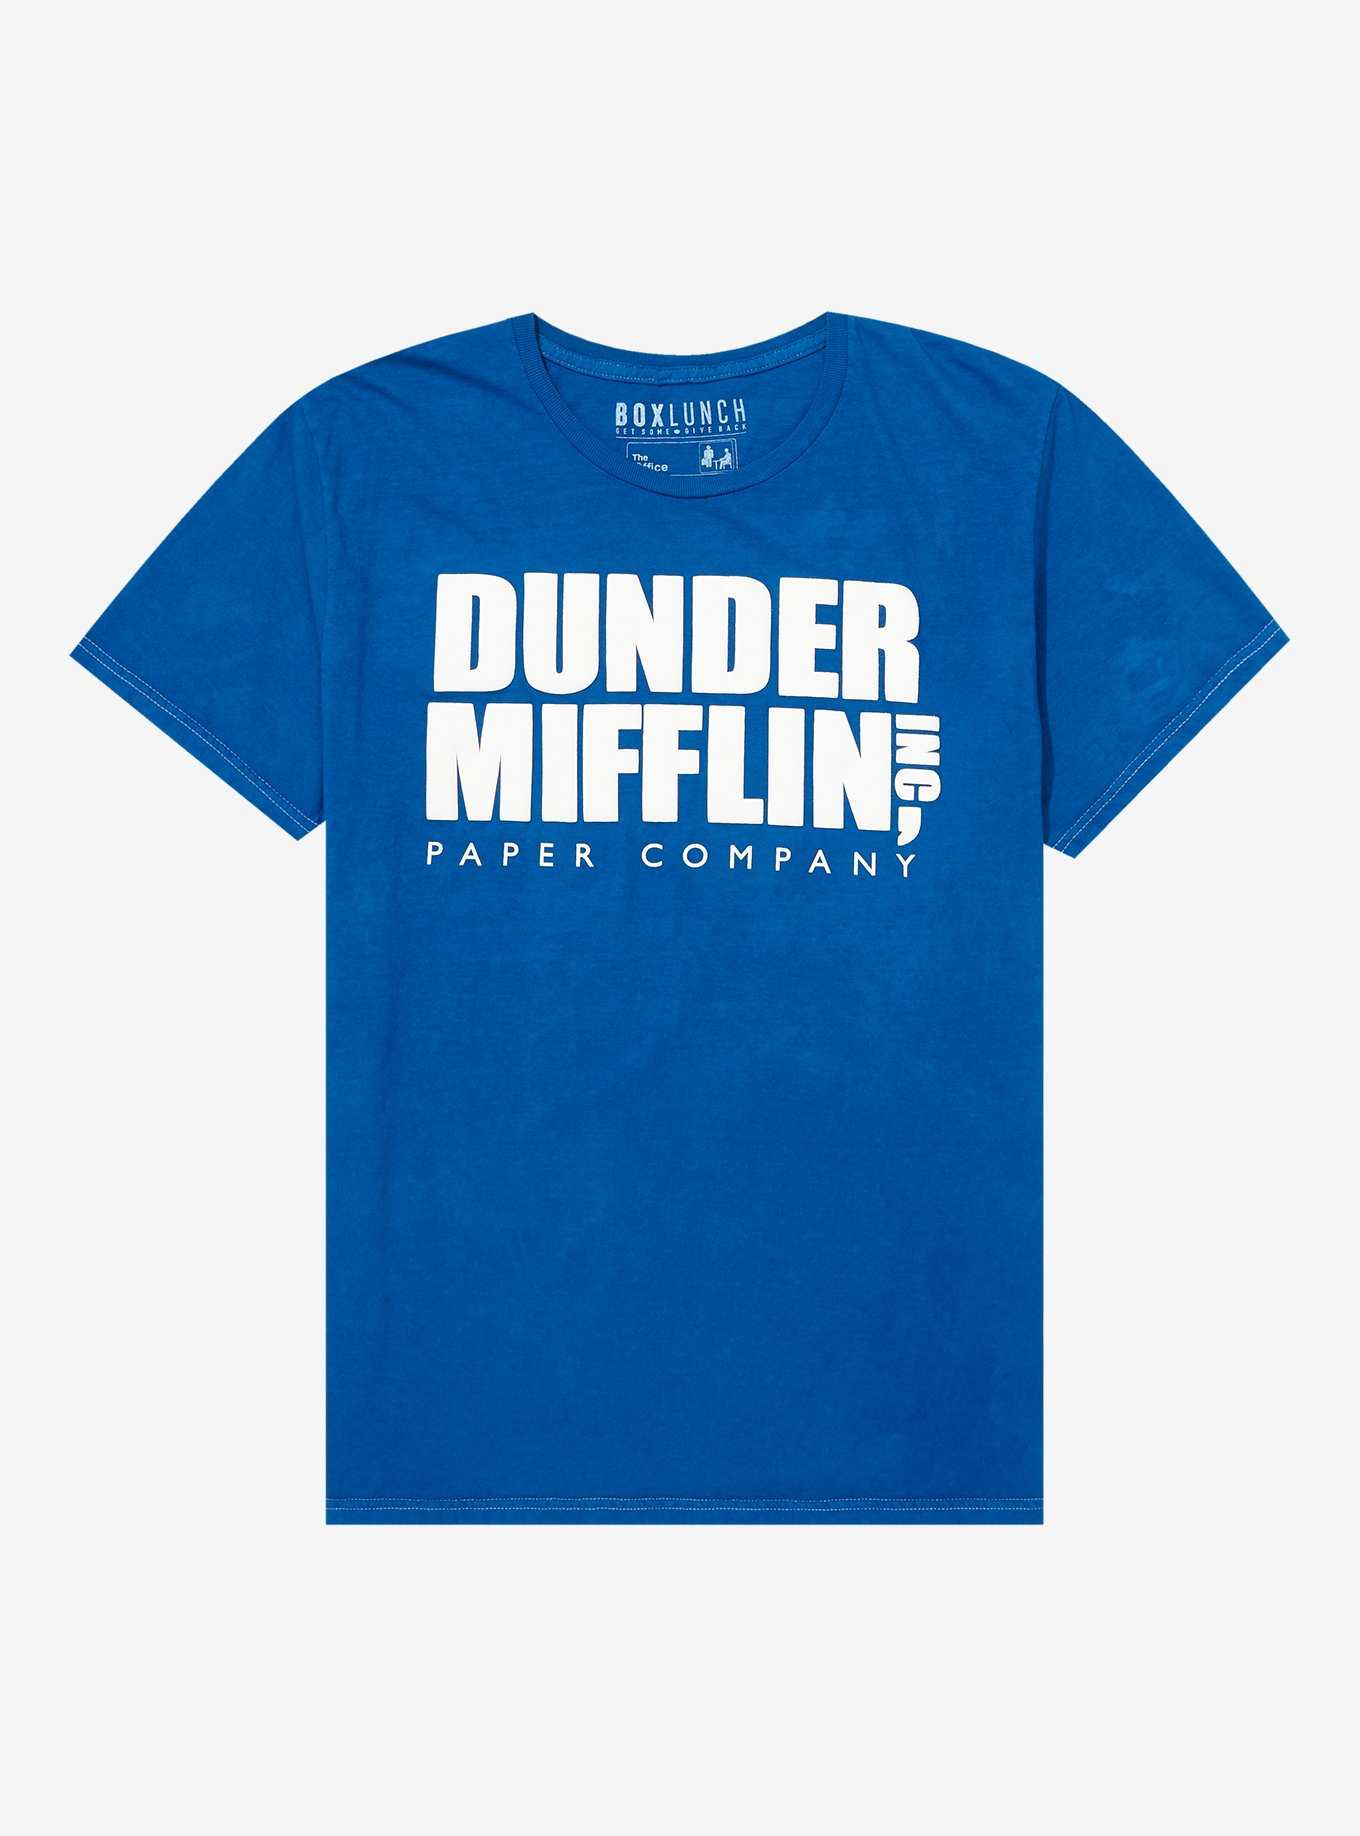 The Office Merchandise, T-Shirts/Apparel. The Office T-Shirts Online.